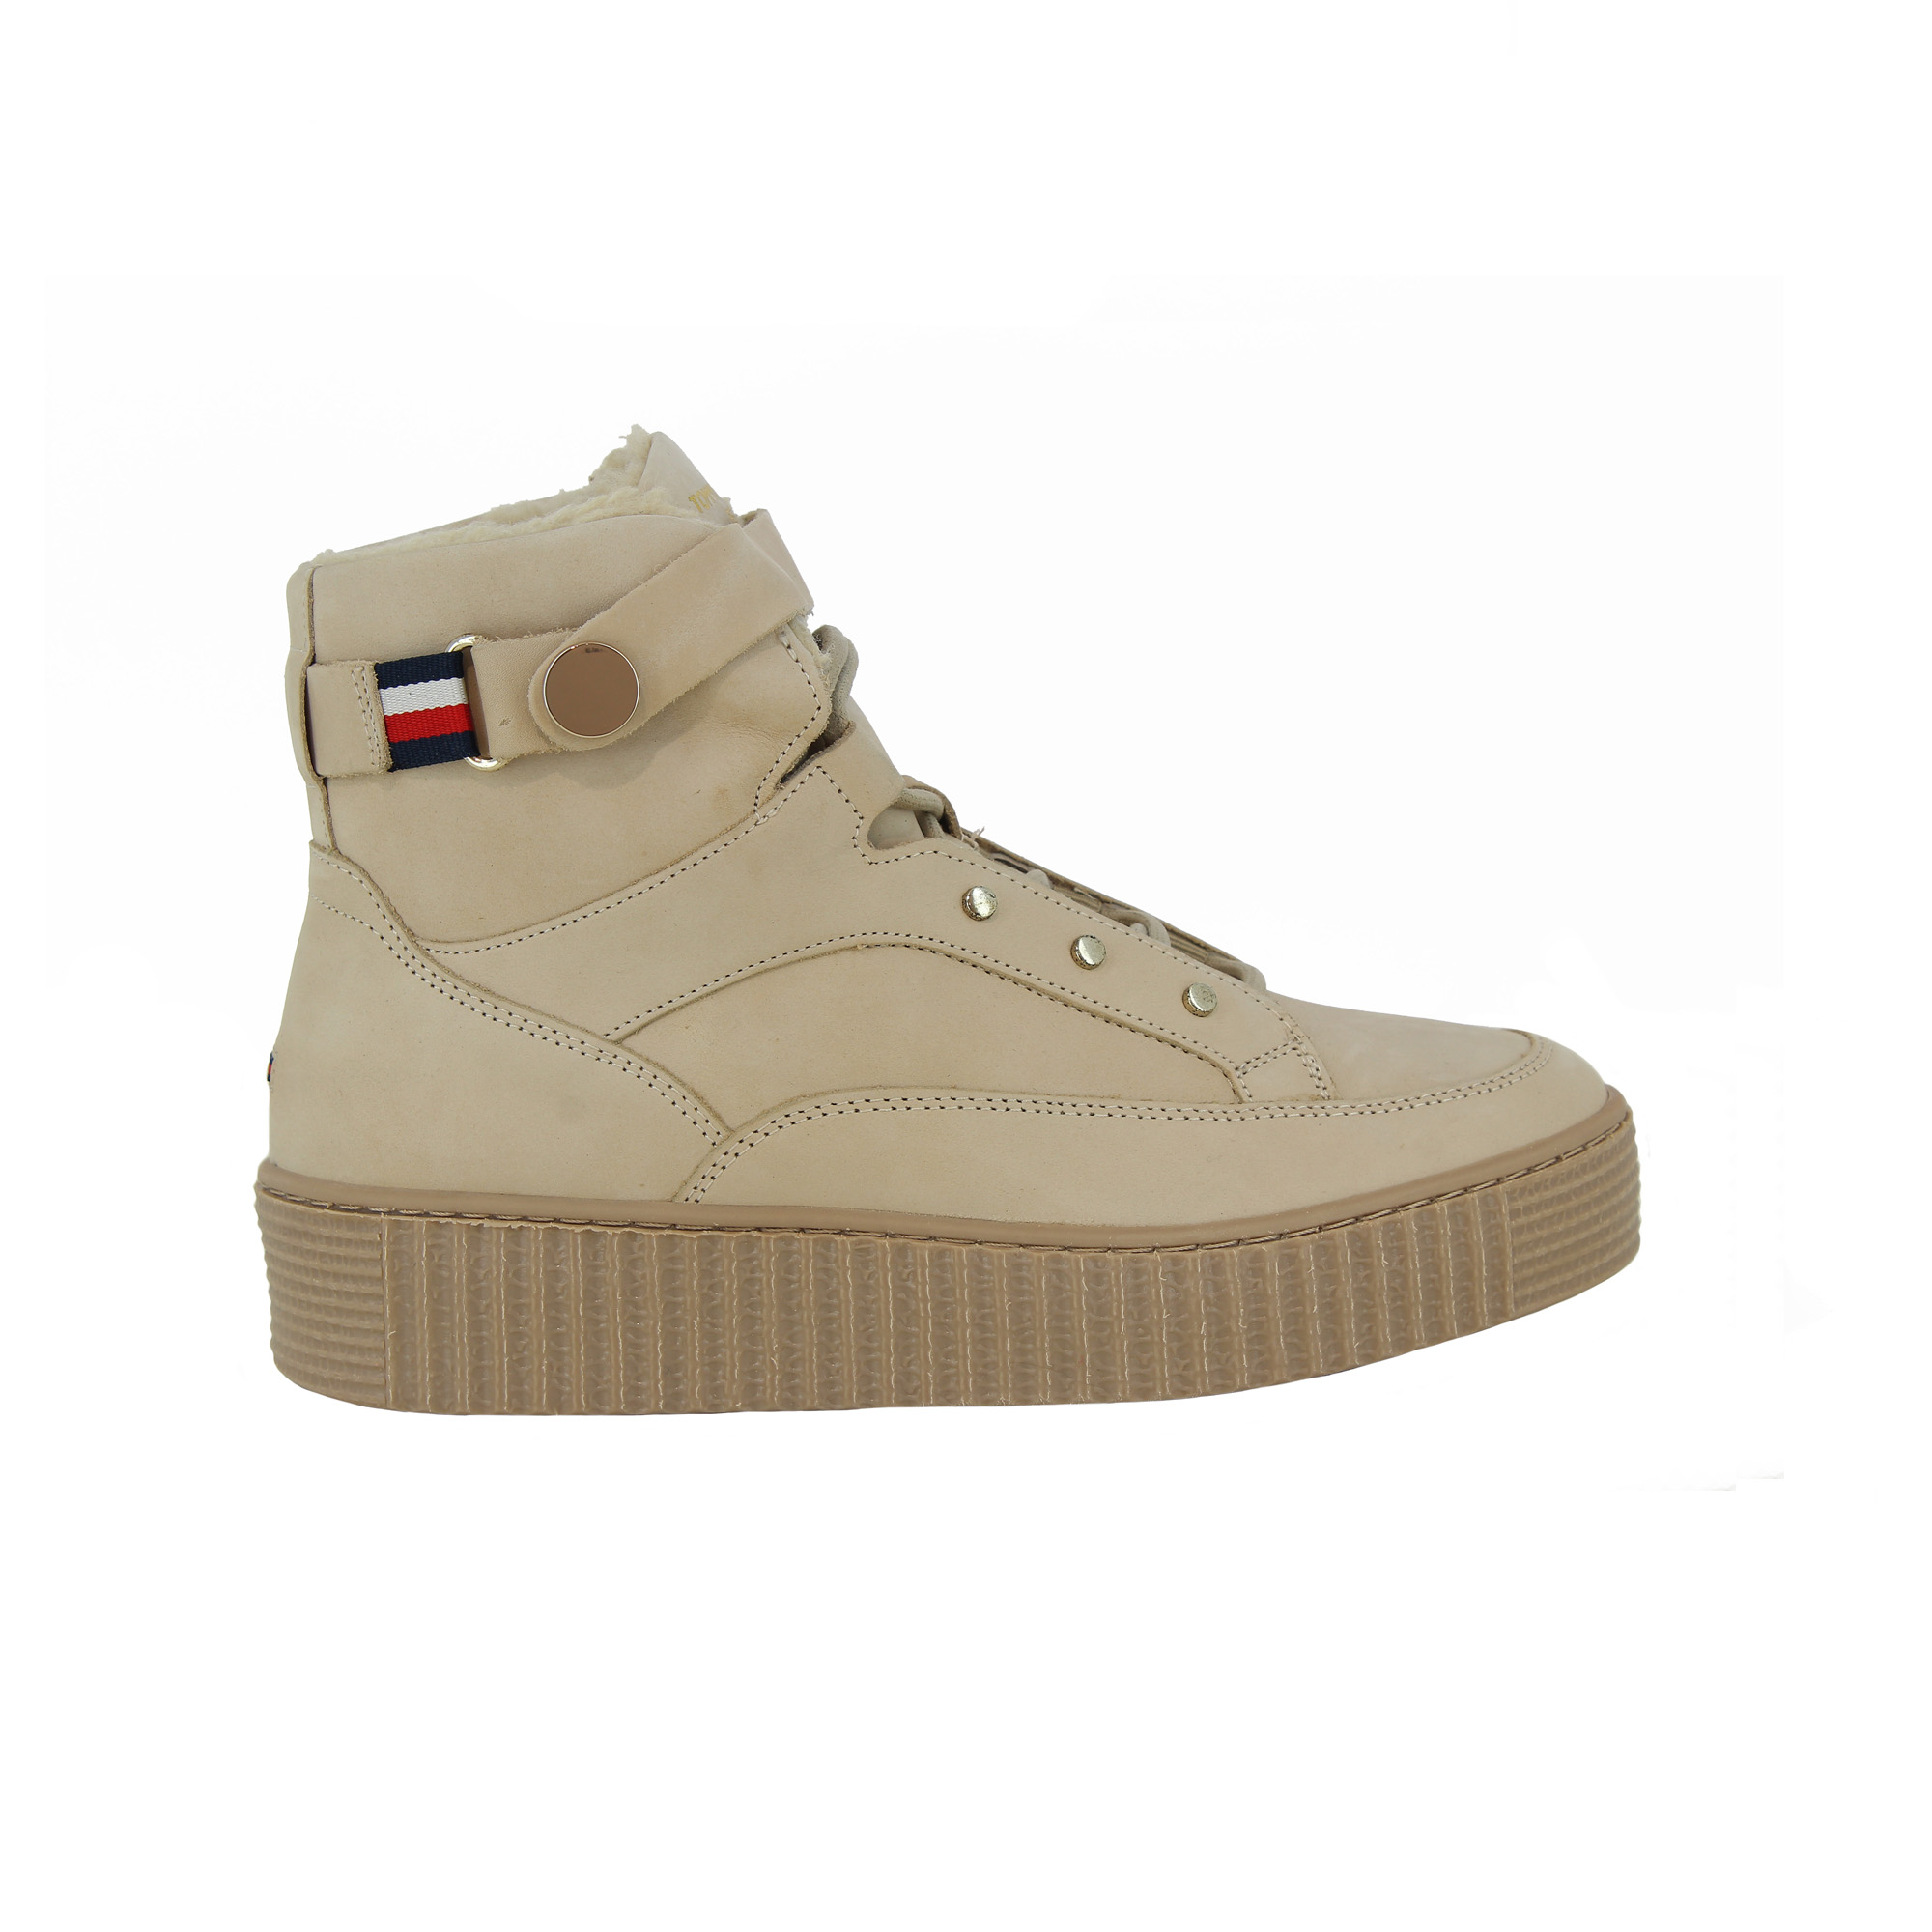 Hilfiger Beige BOOT Classic LACE WARMLINED Tommy UP